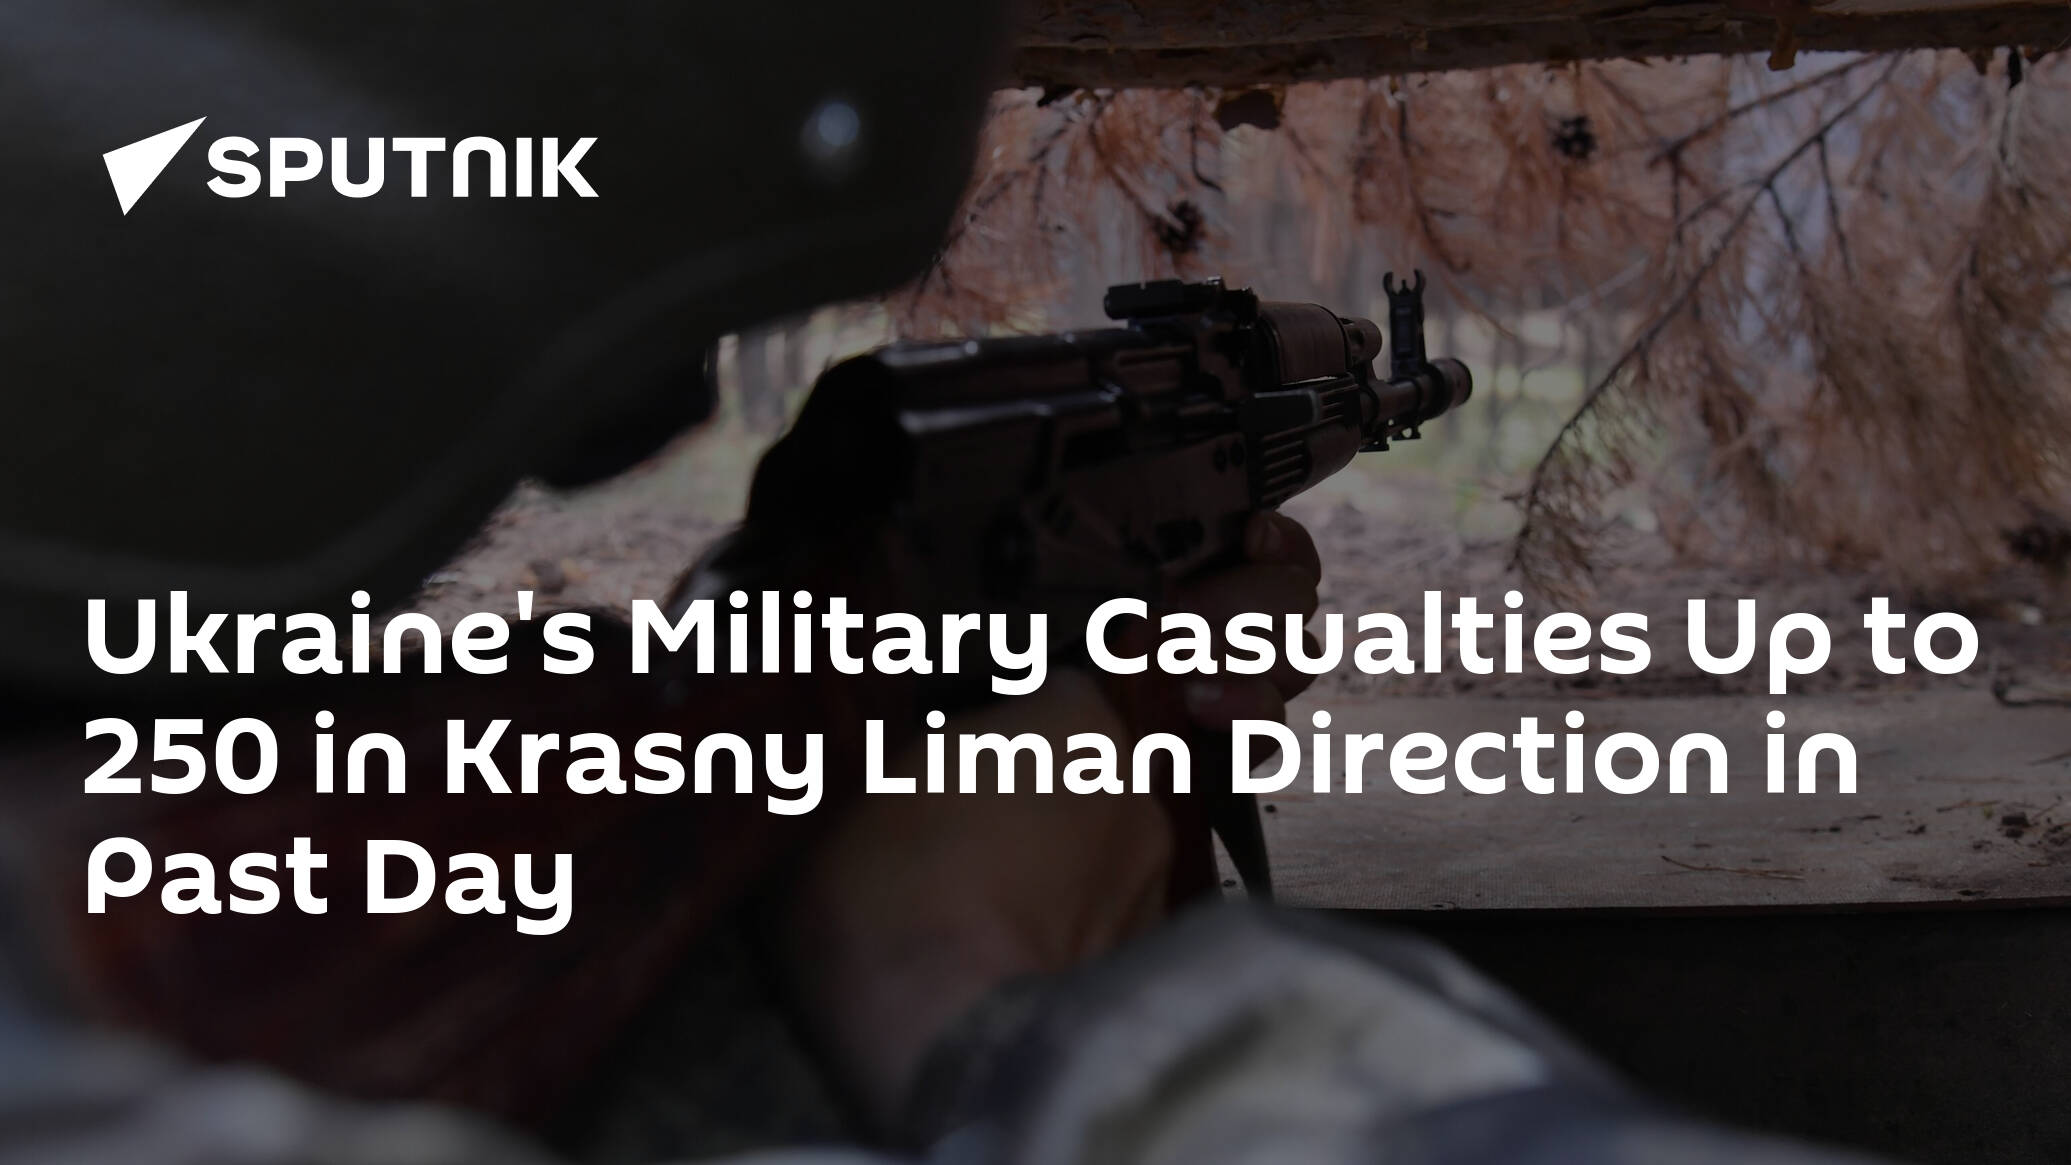 Ukraine's Military Casualties Up to 250 in Krasny Liman Direction in Past Day